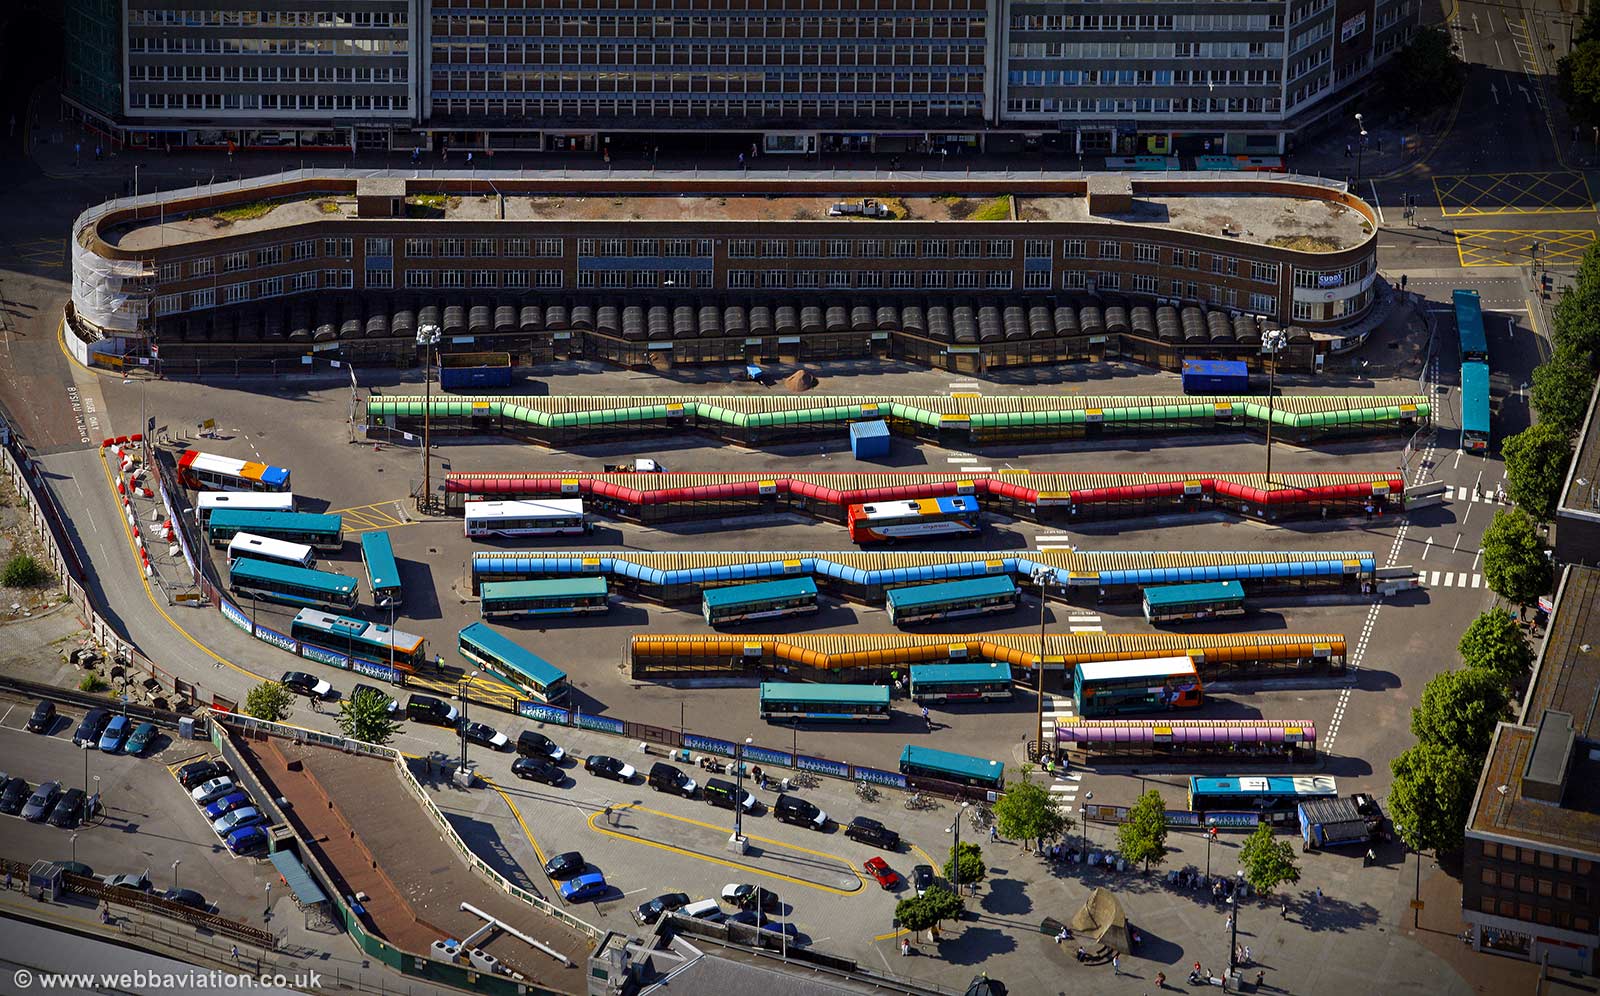 Cardiff Central bus station aerial photograph